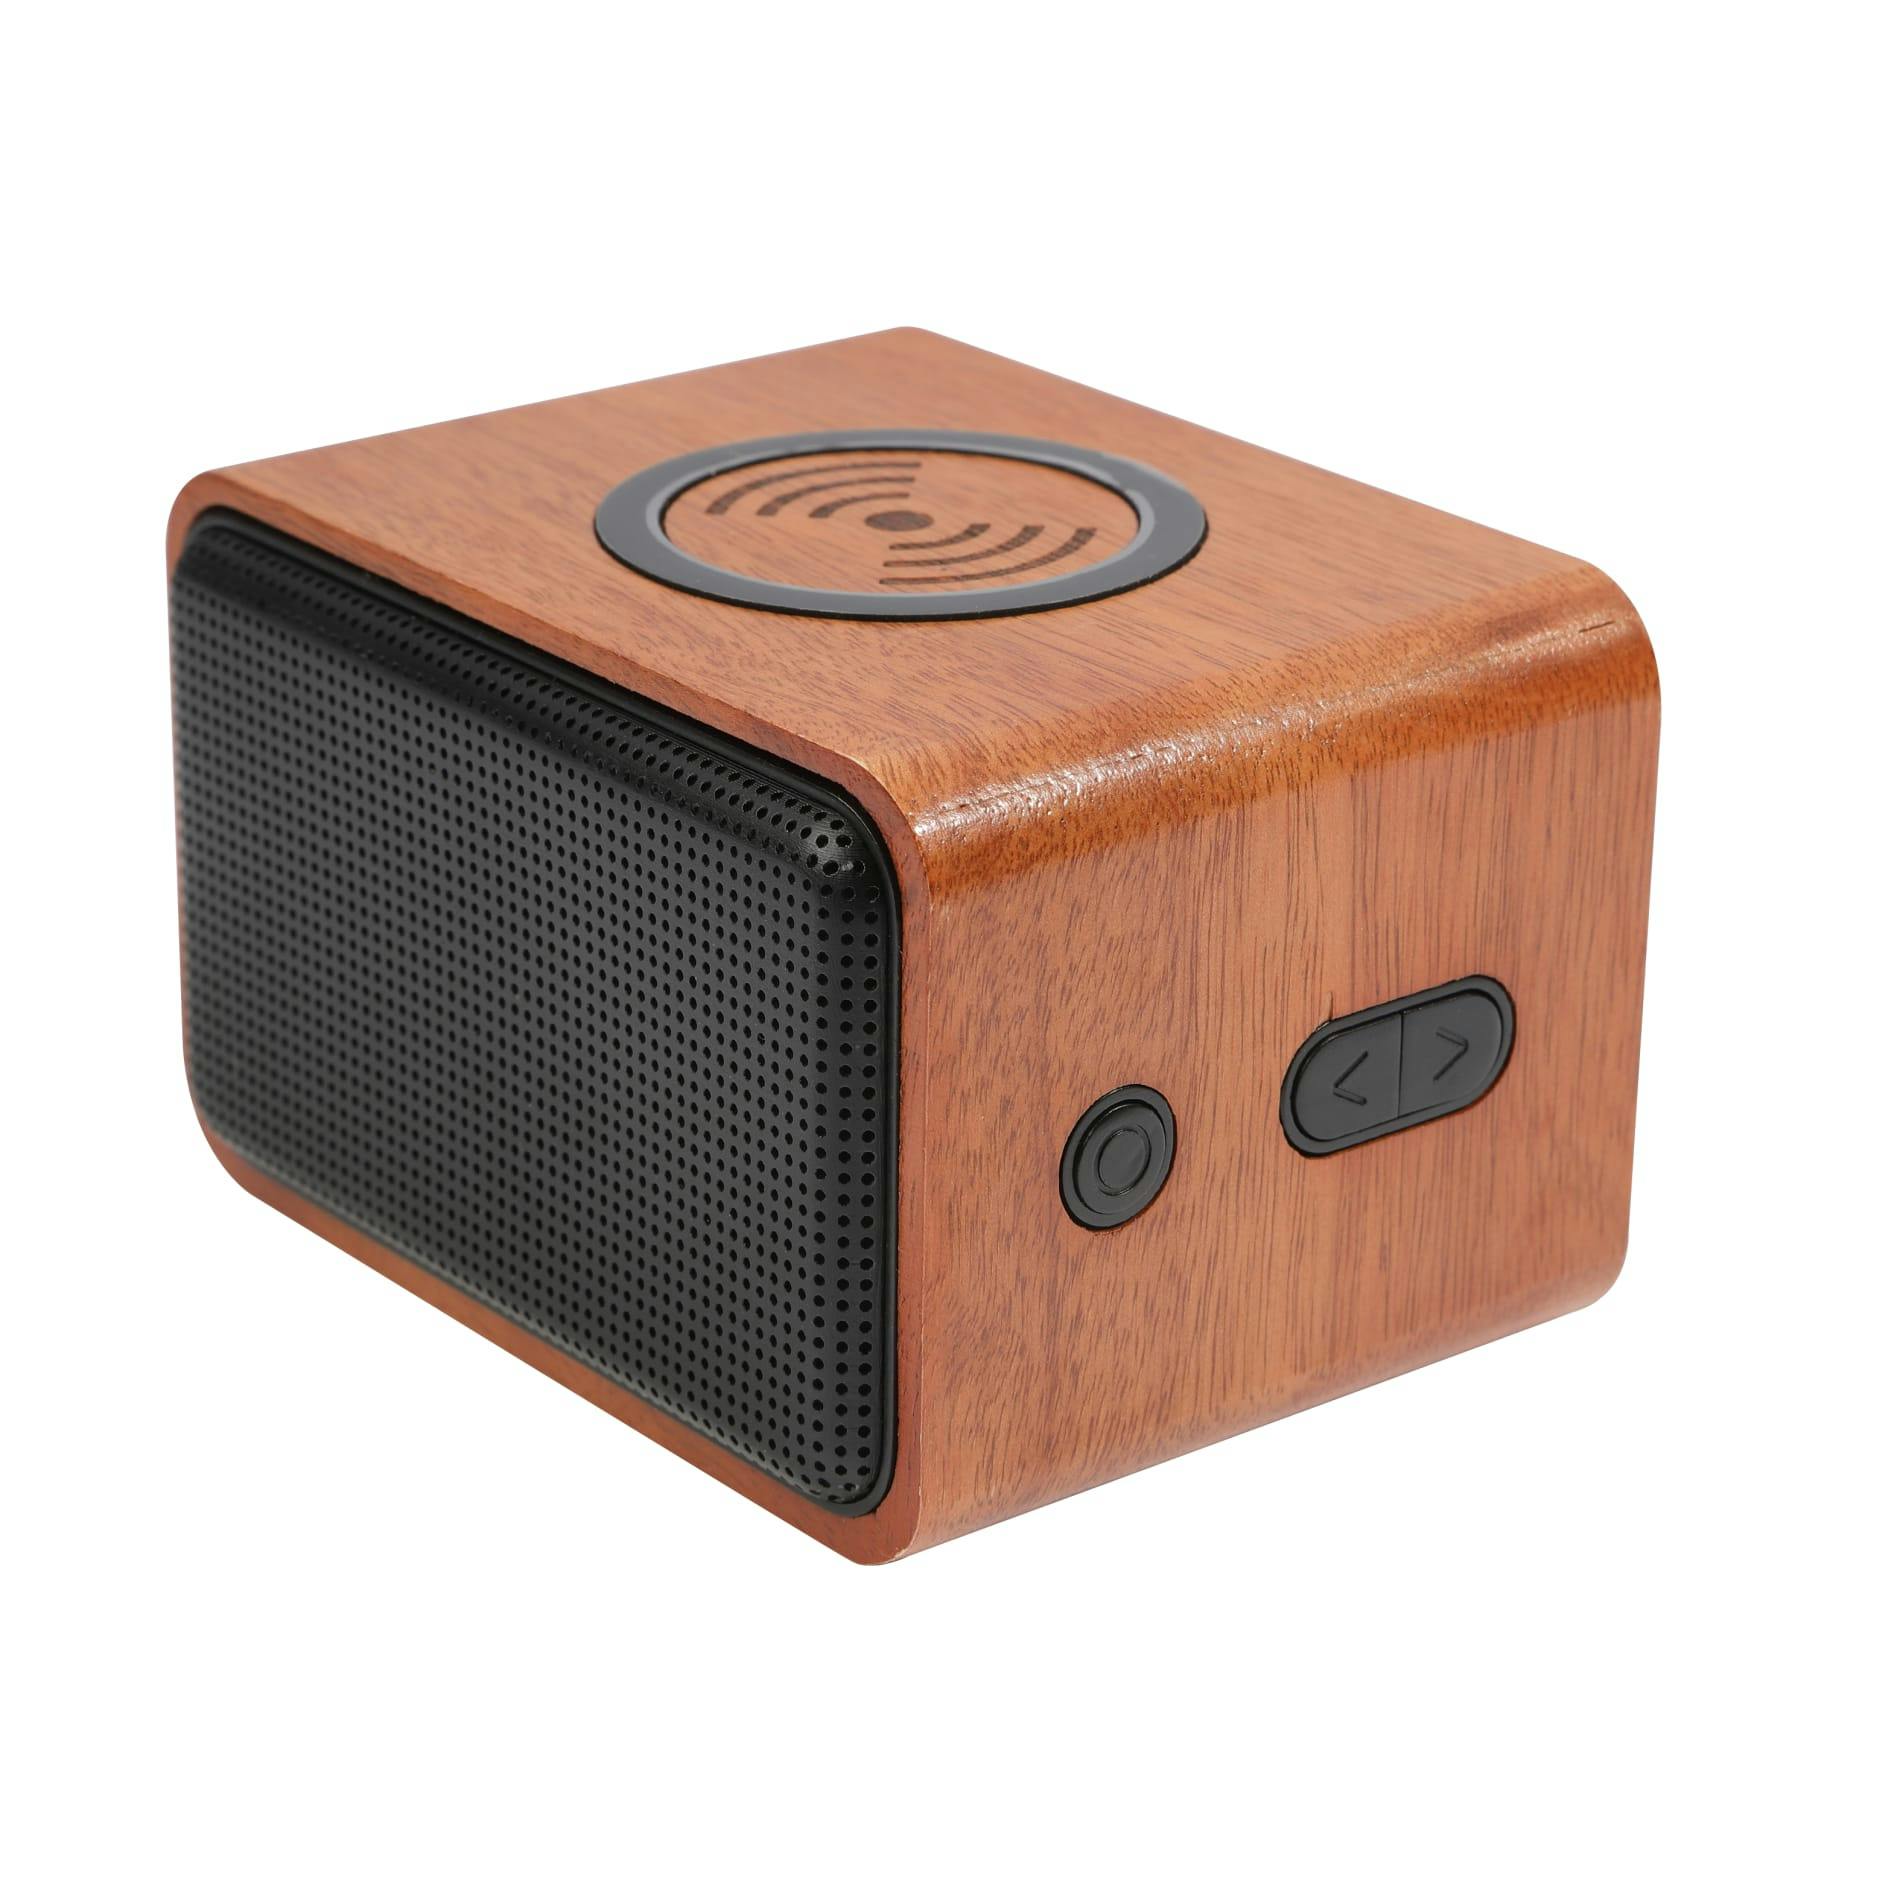 Wood Bluetooth Speaker with Wireless Charging Pad - additional Image 1